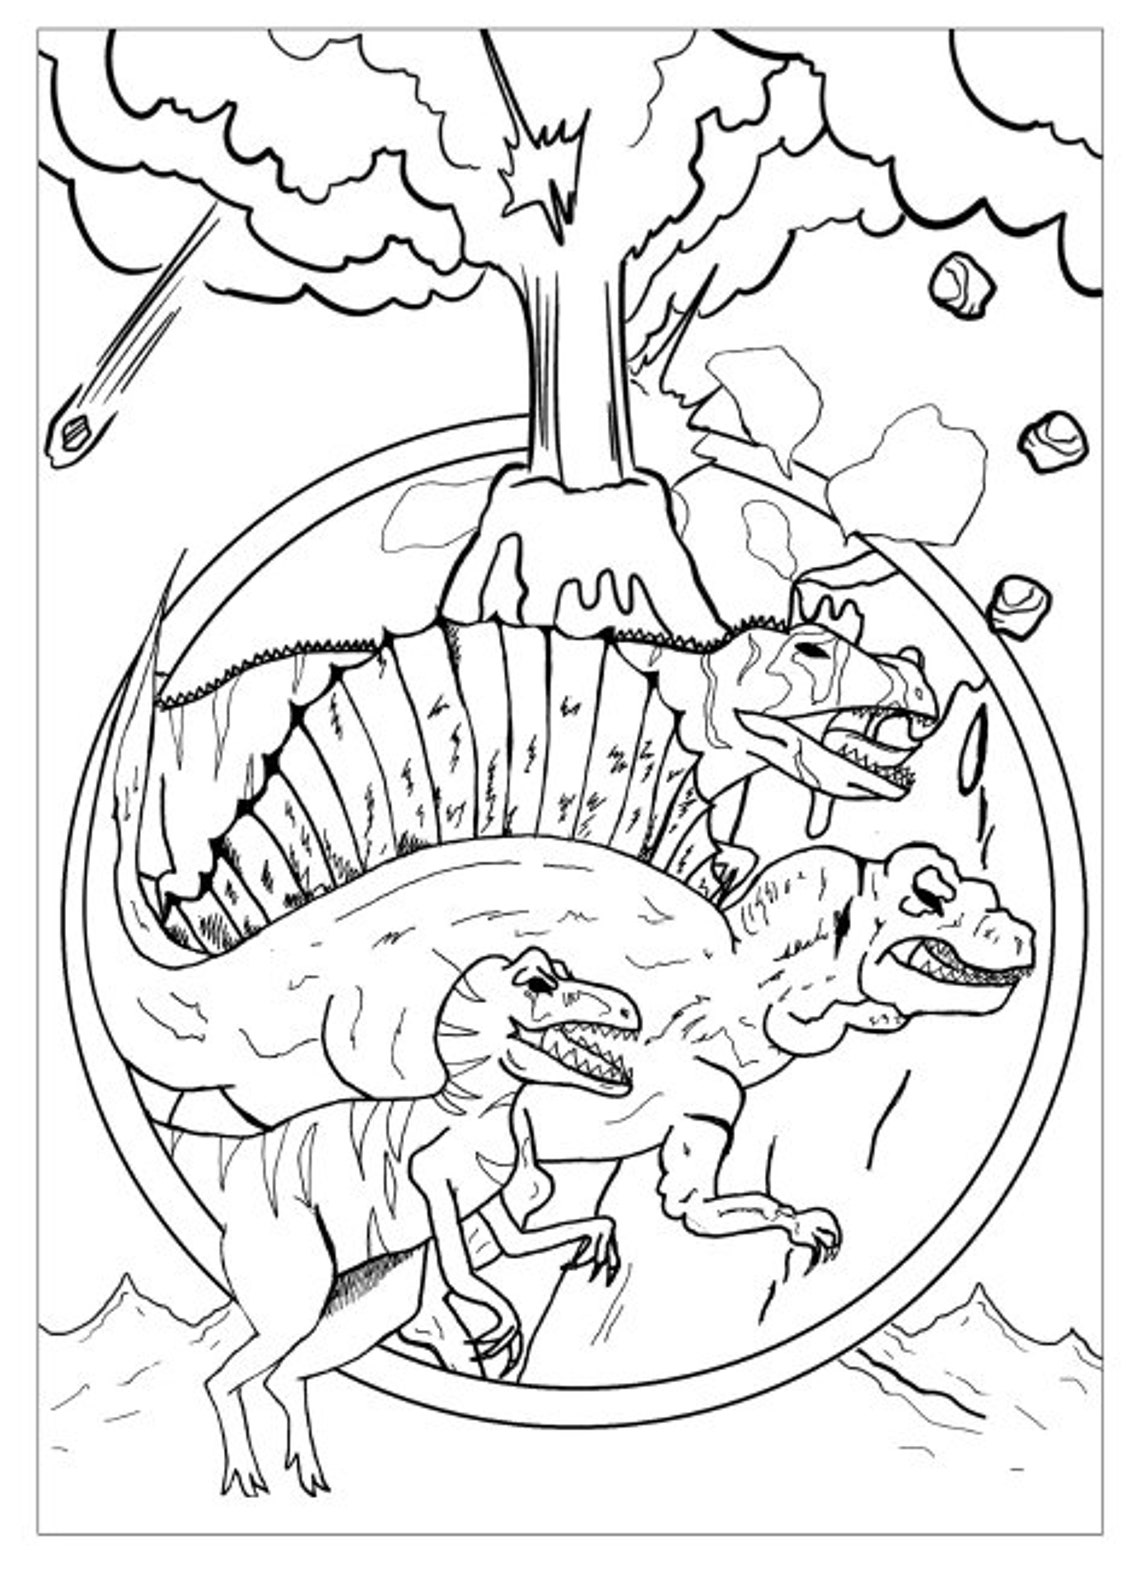 Dinosaurs over Volcano Coloring page for Adults and children | Etsy